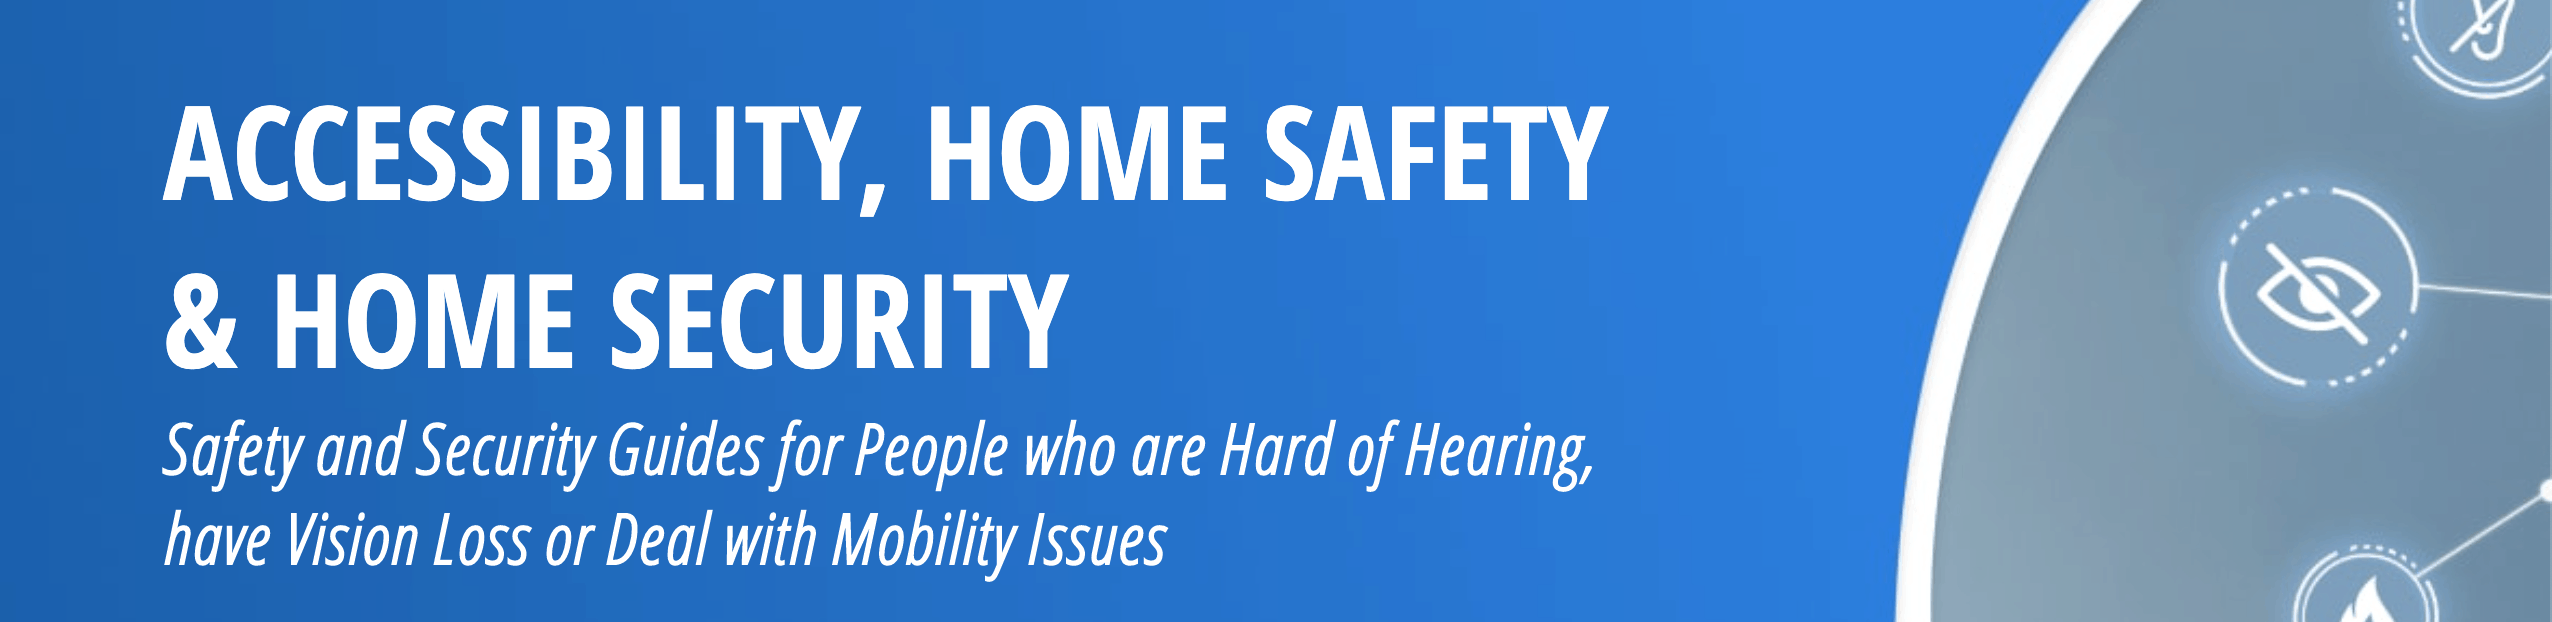 Accessibility, Home Safety & Home Security Featured Image